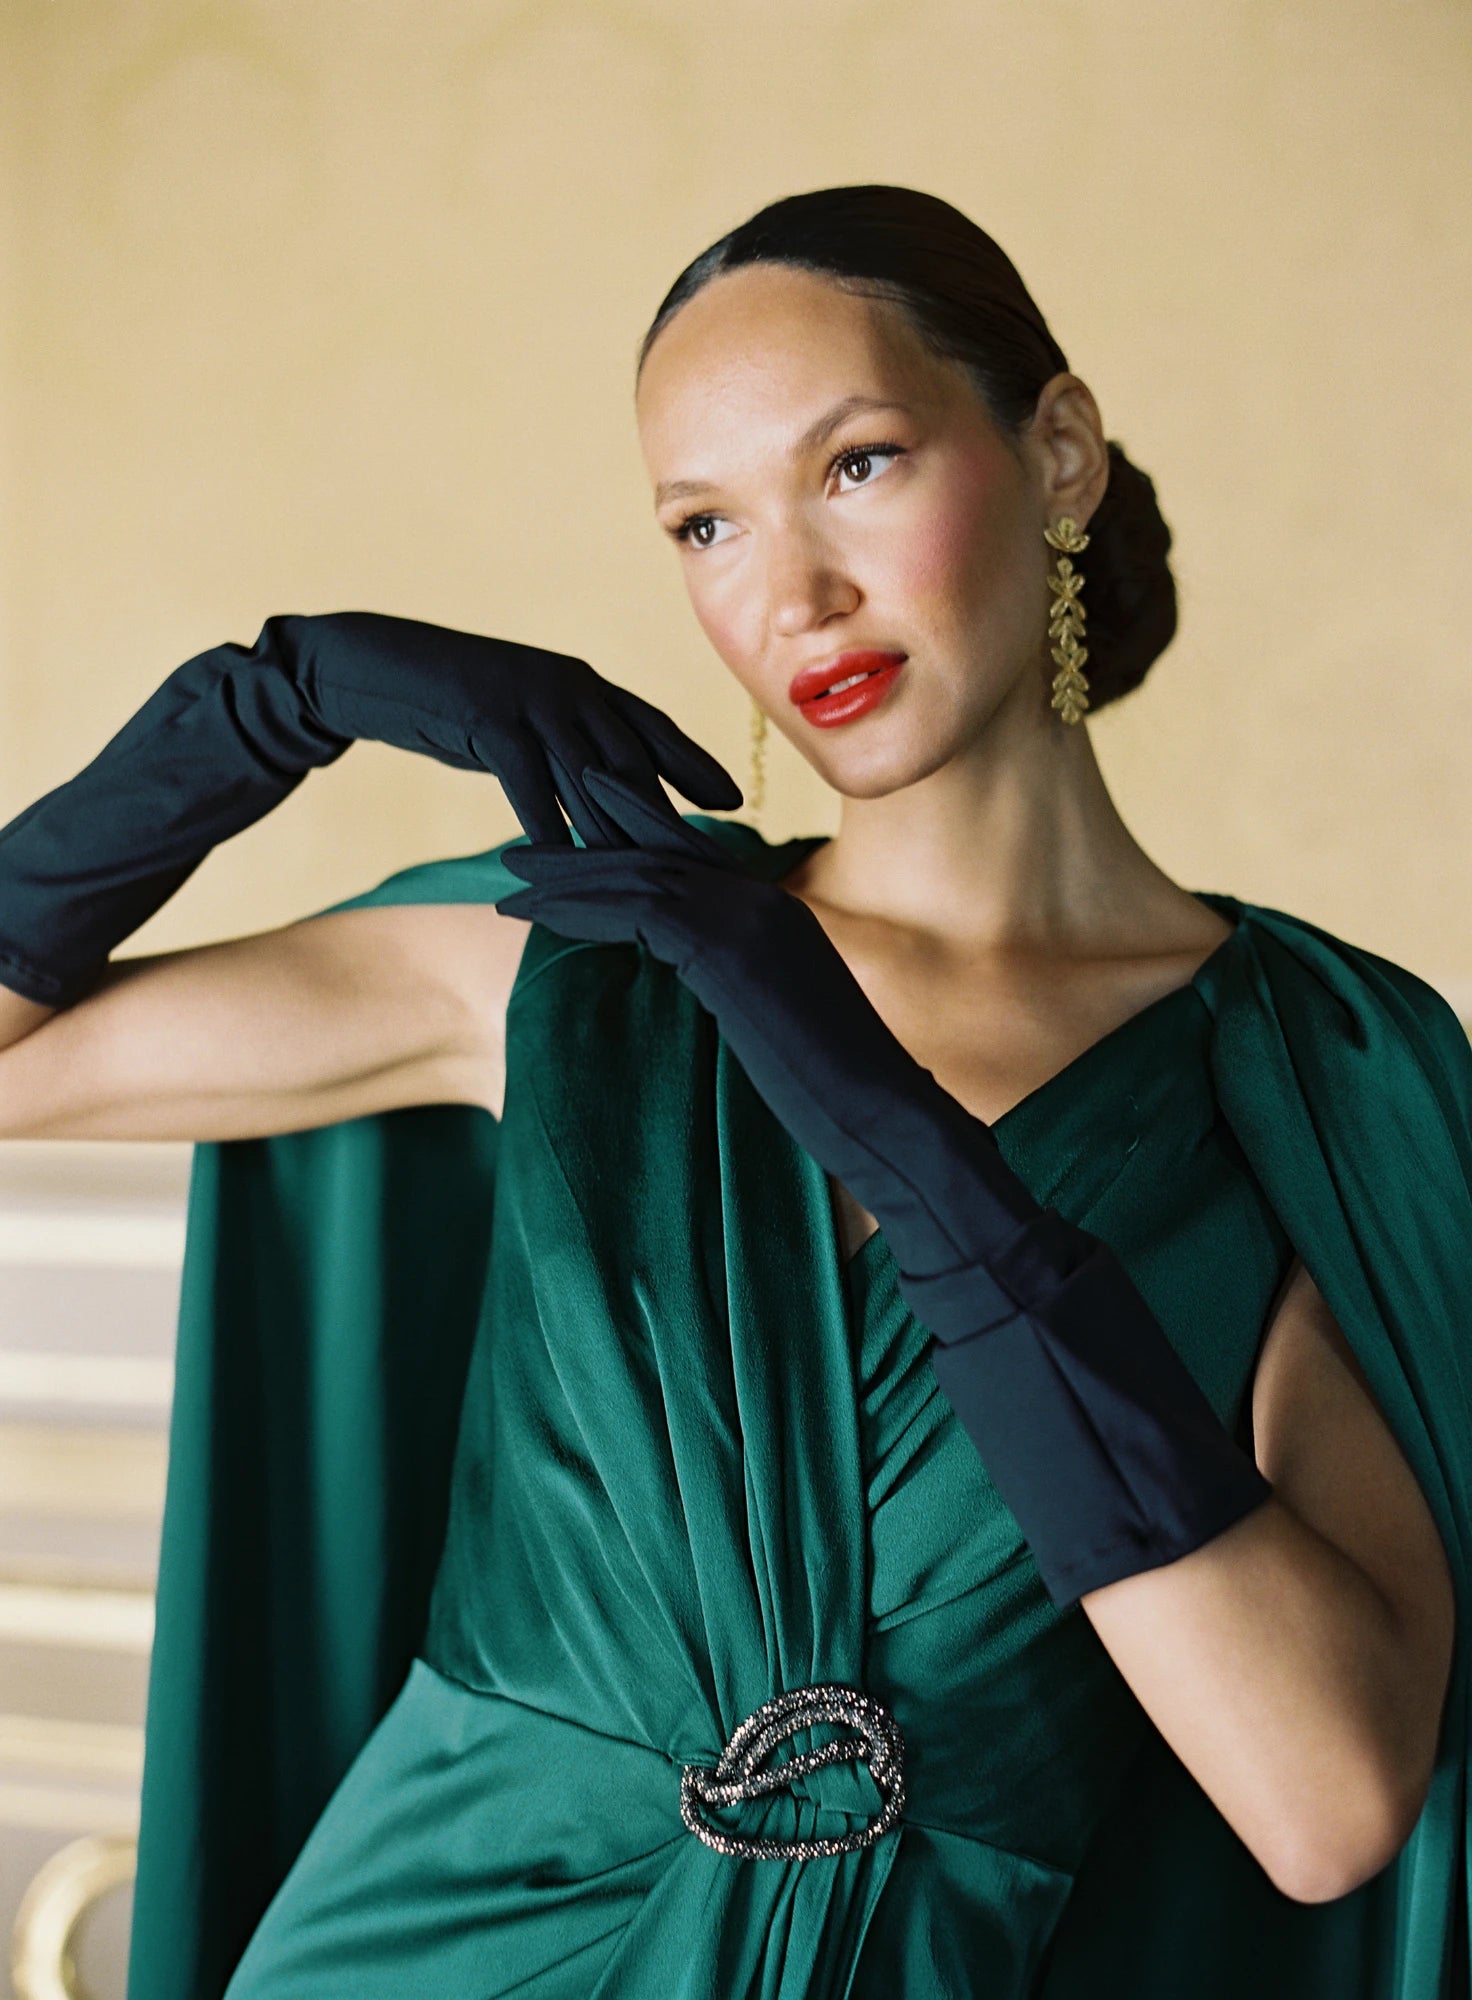 Woman wearing emerald green formal dress and long black gloves.